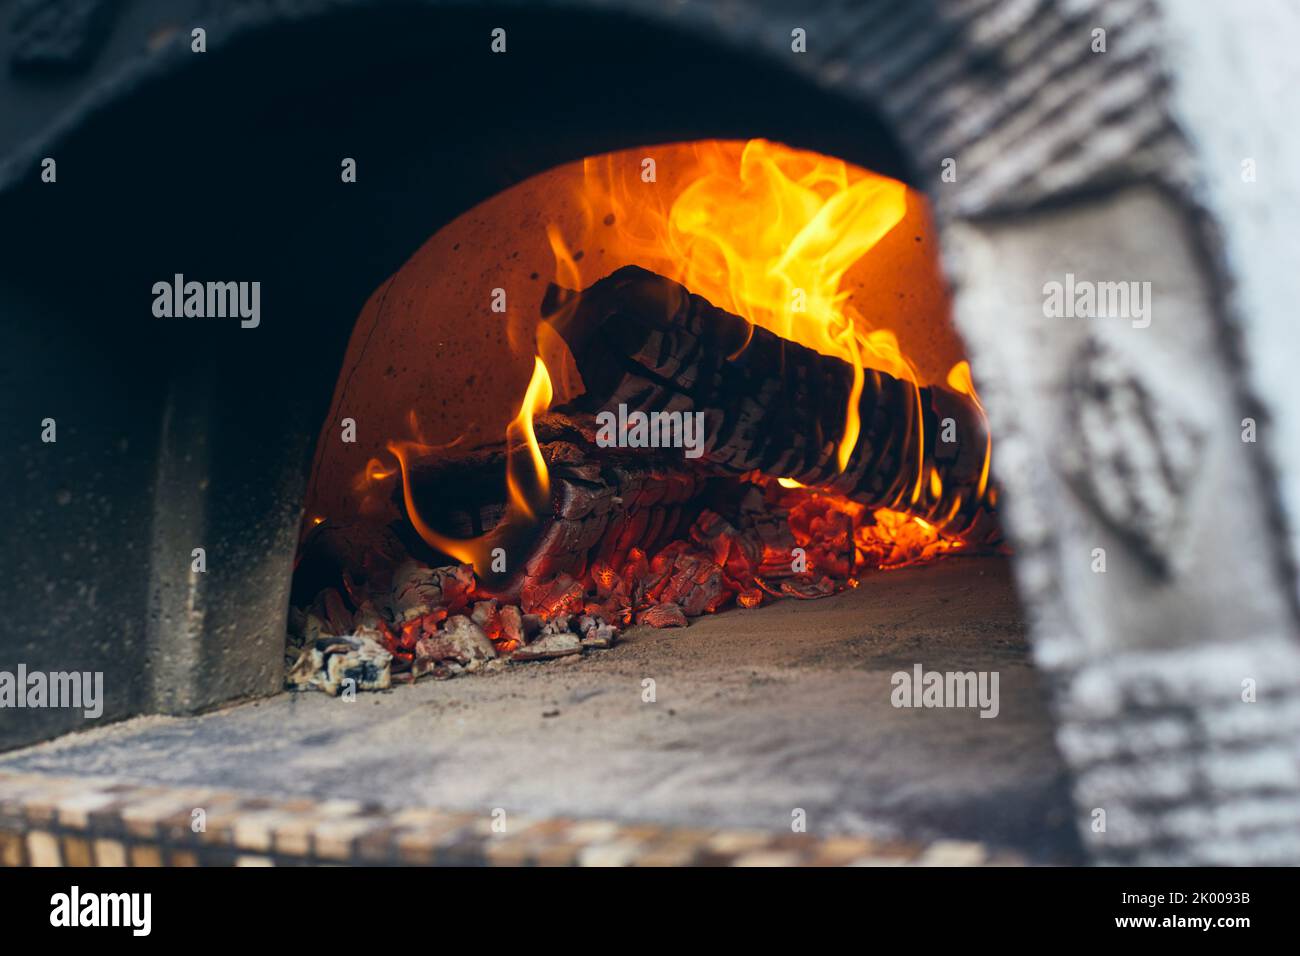 Wood-fired pizza oven with birch logs for kindling. The fire burns and the oven heats up. Front view. Stock Photo